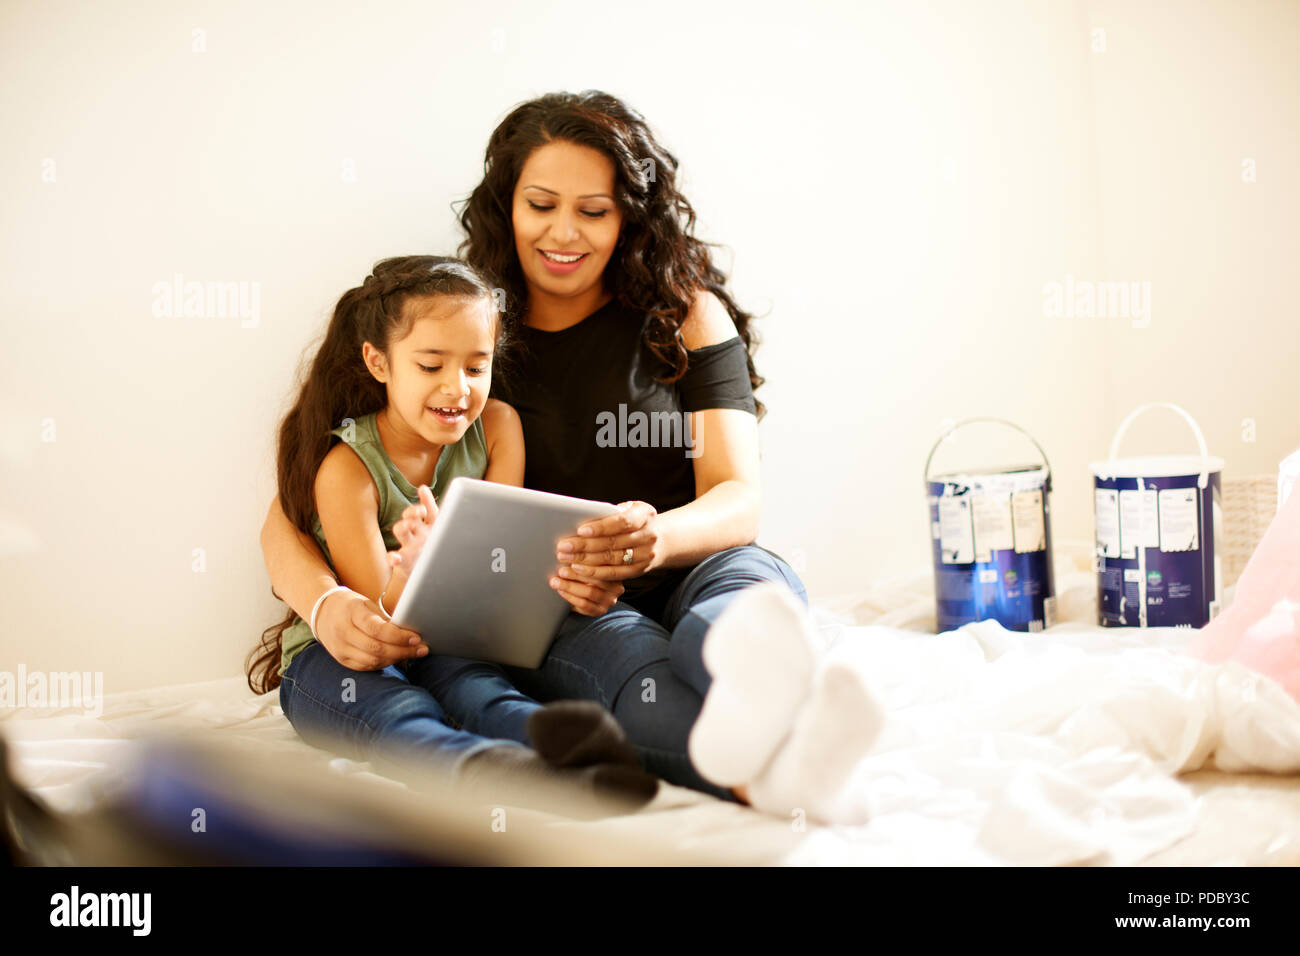 Mother and daughter with digital tablet preparing painting project Stock Photo